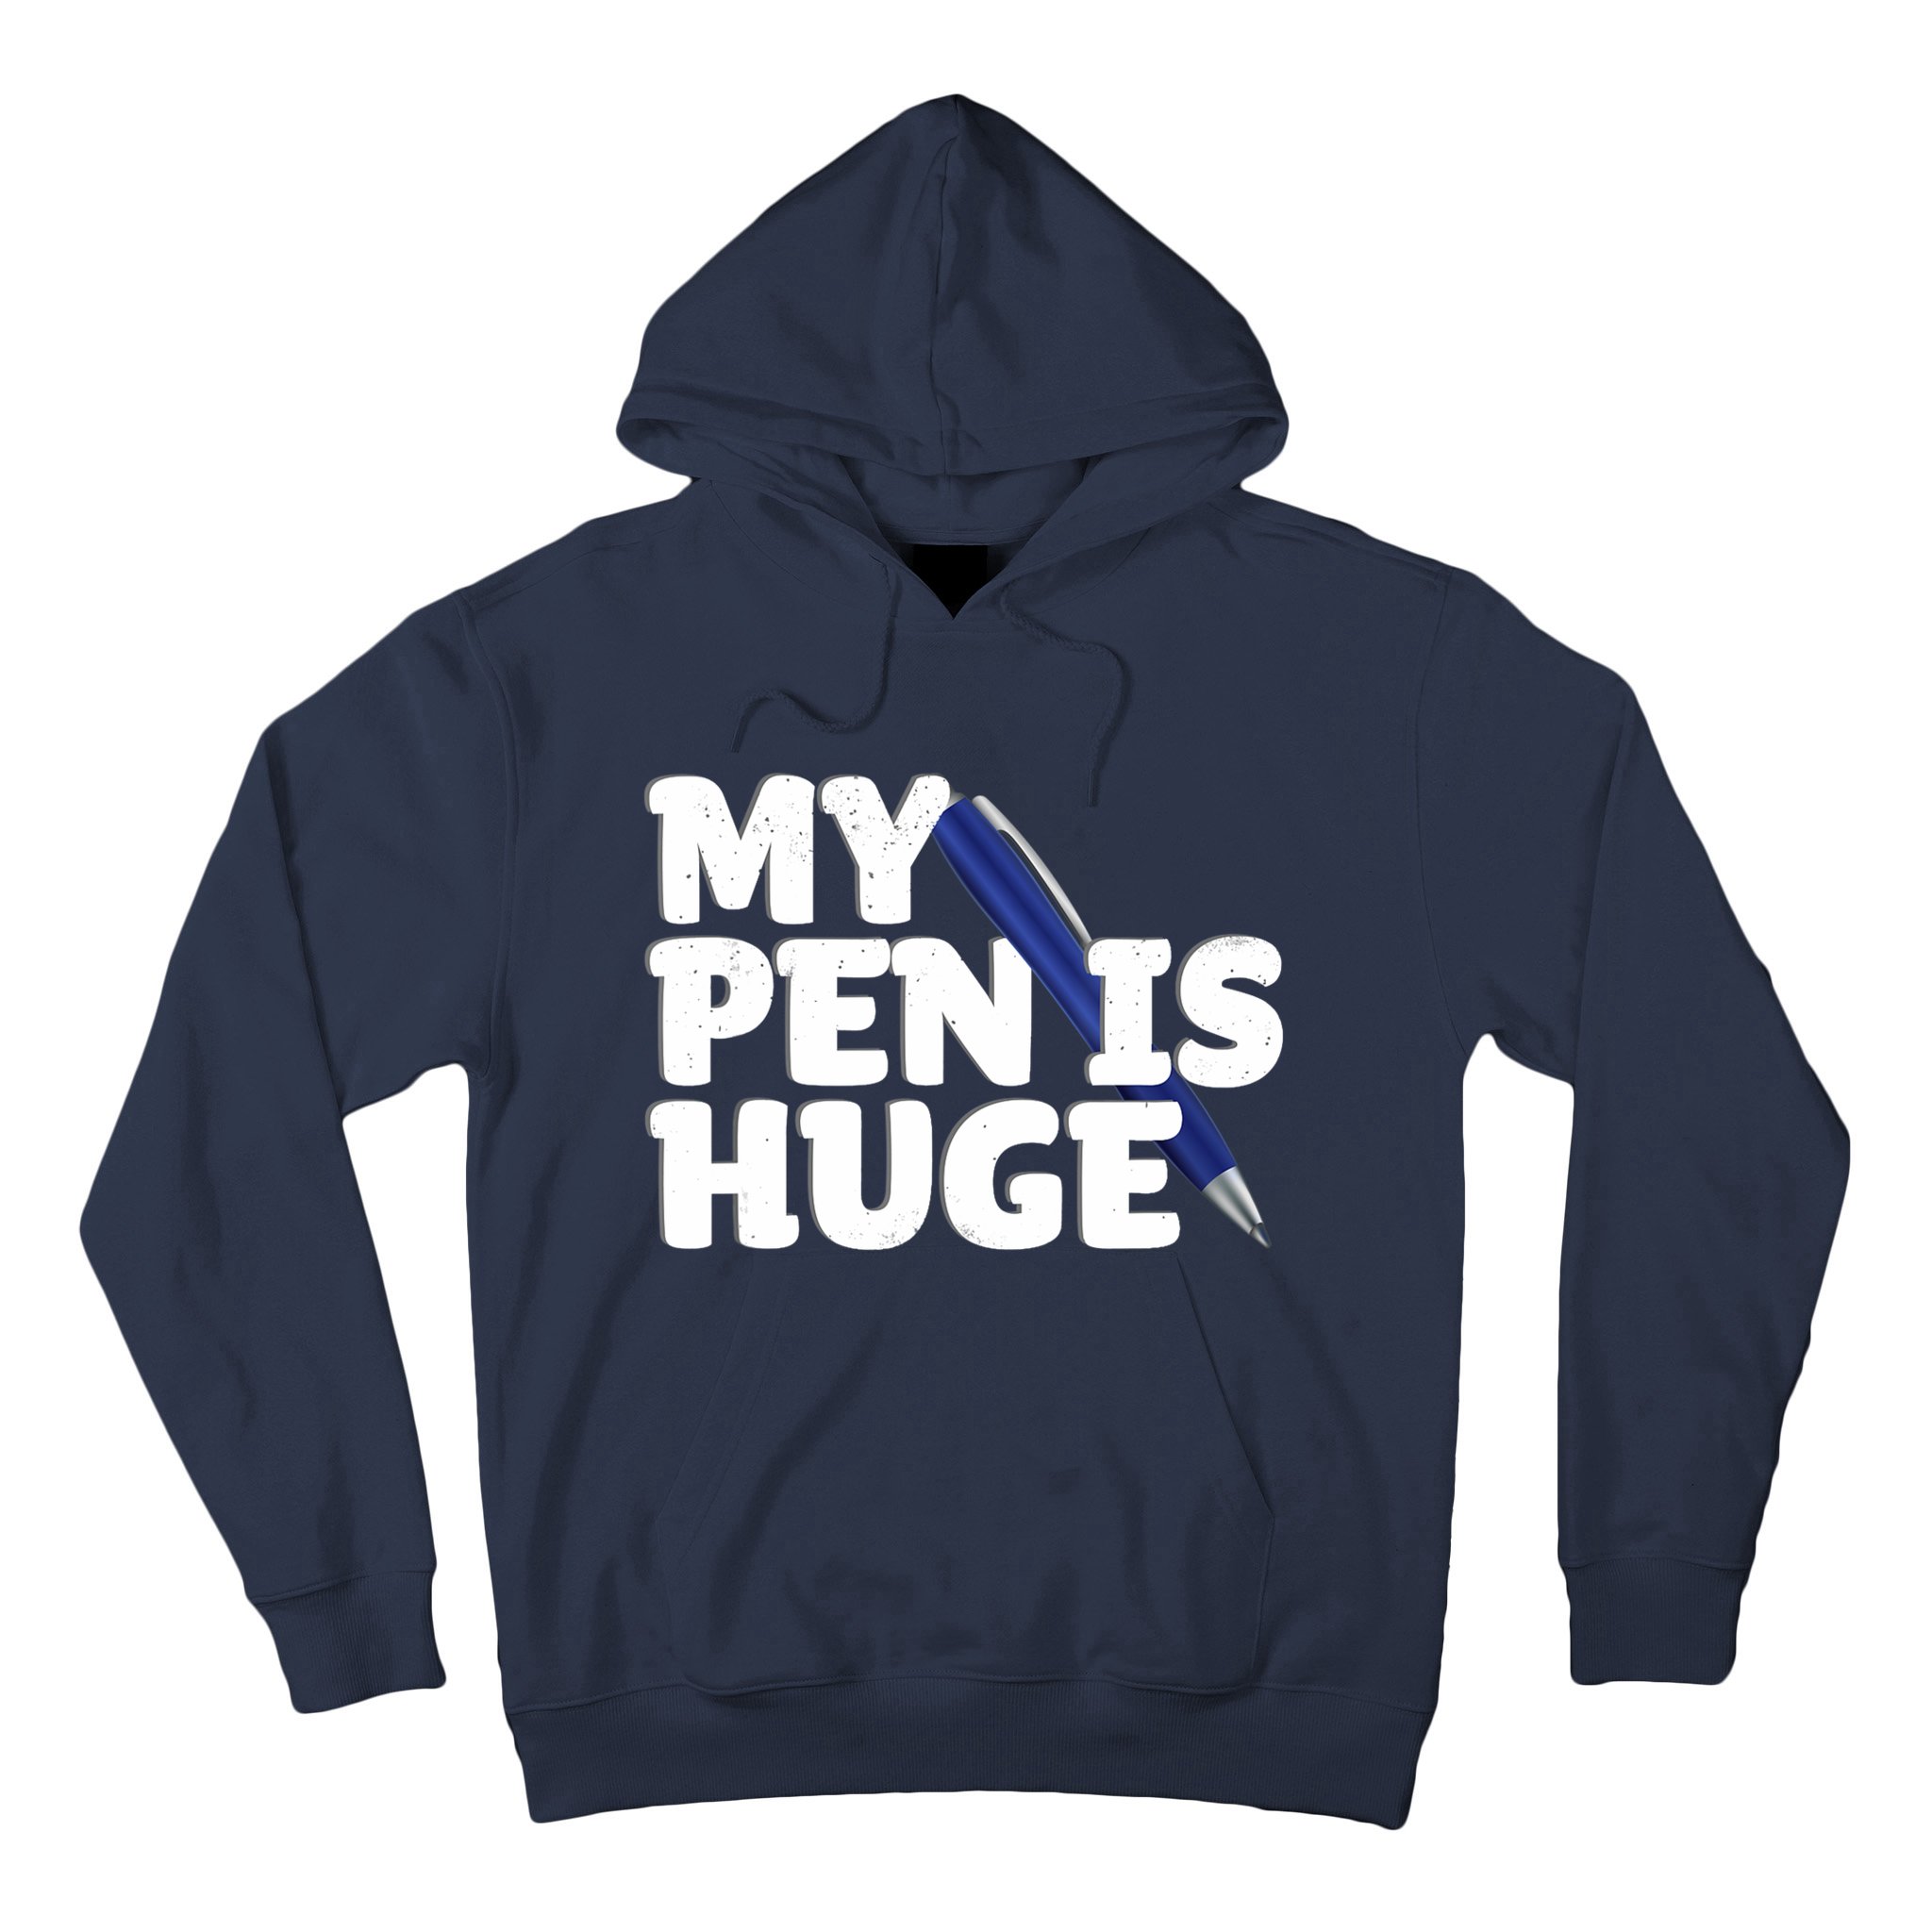 https://images3.teeshirtpalace.com/images/productImages/mpi6908671-my-pen-is-huge-adult-humor-inappropriate-dirty-joke--navy-afth-garment.jpg